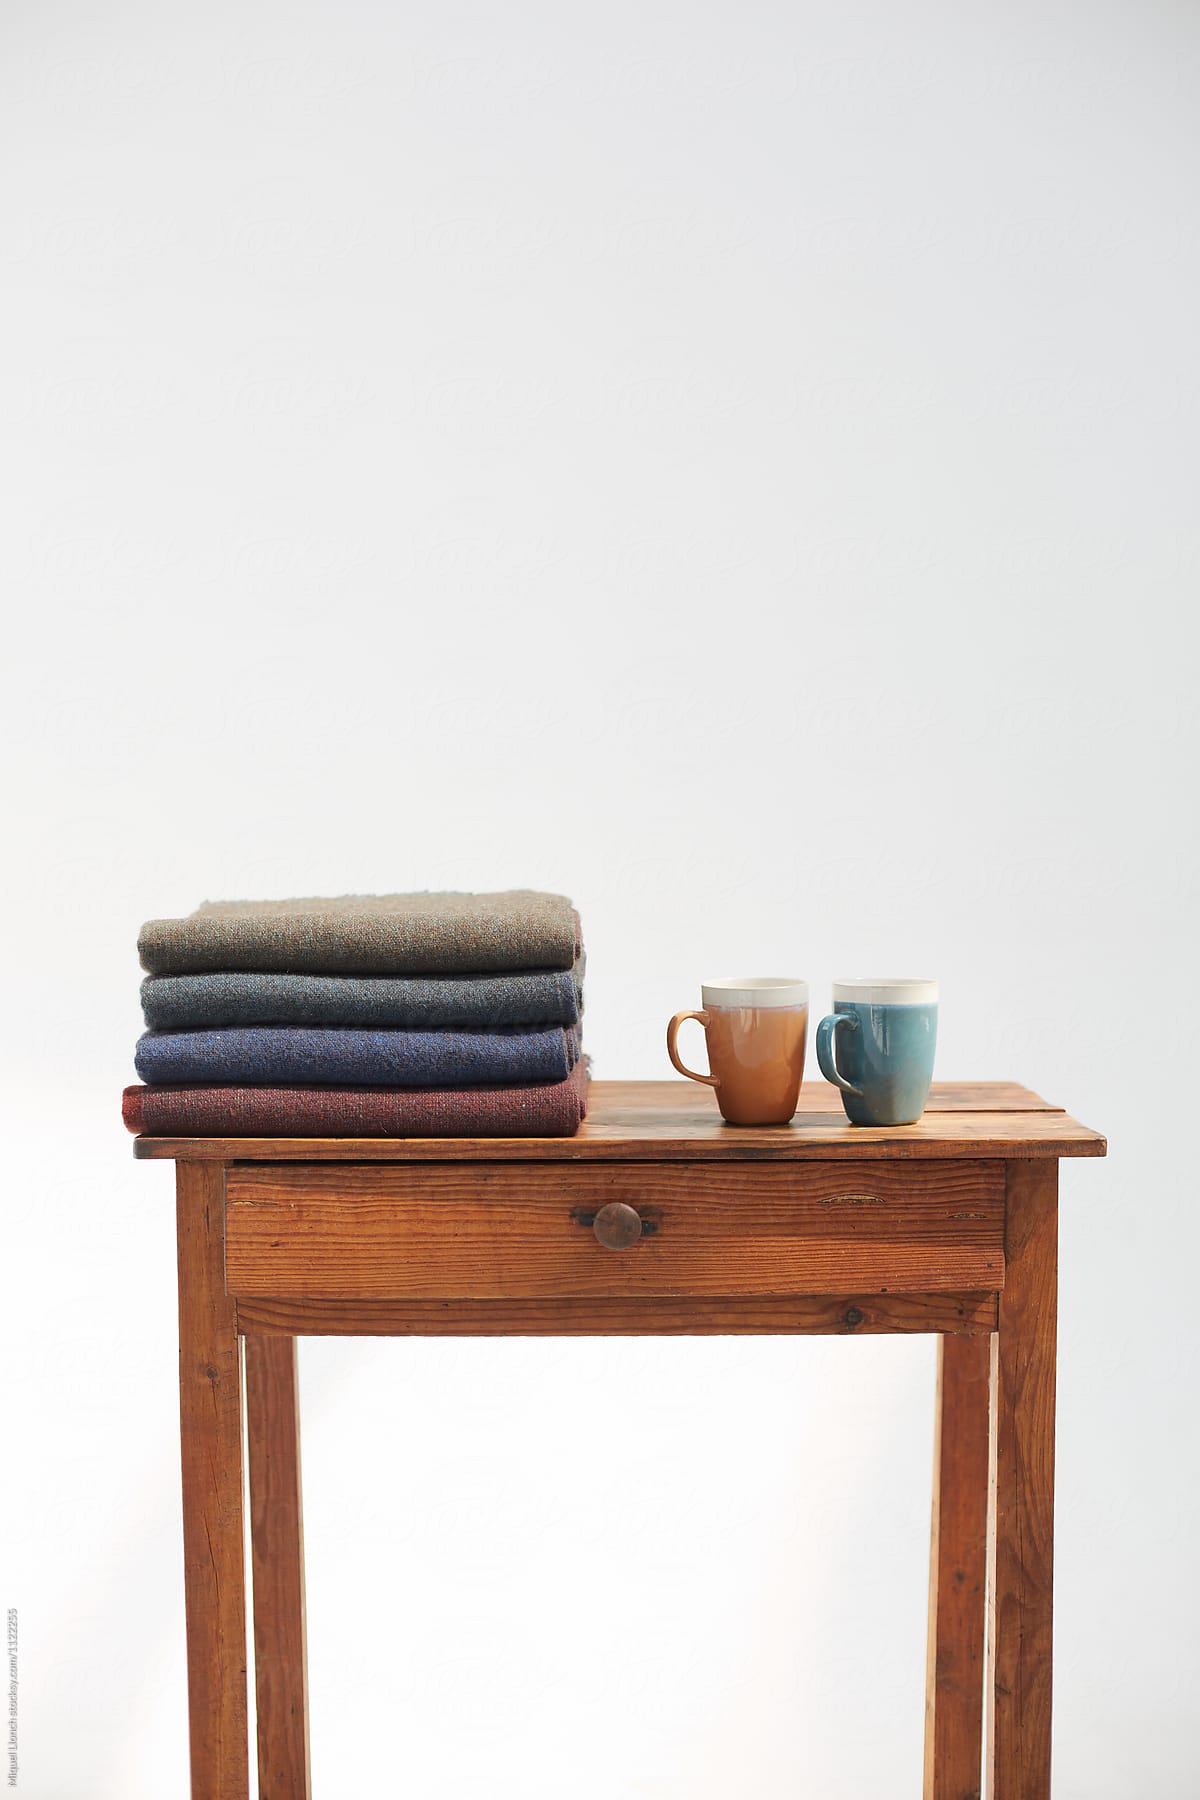 Stack of wool blankets and two ceramic mugs on a wooden table